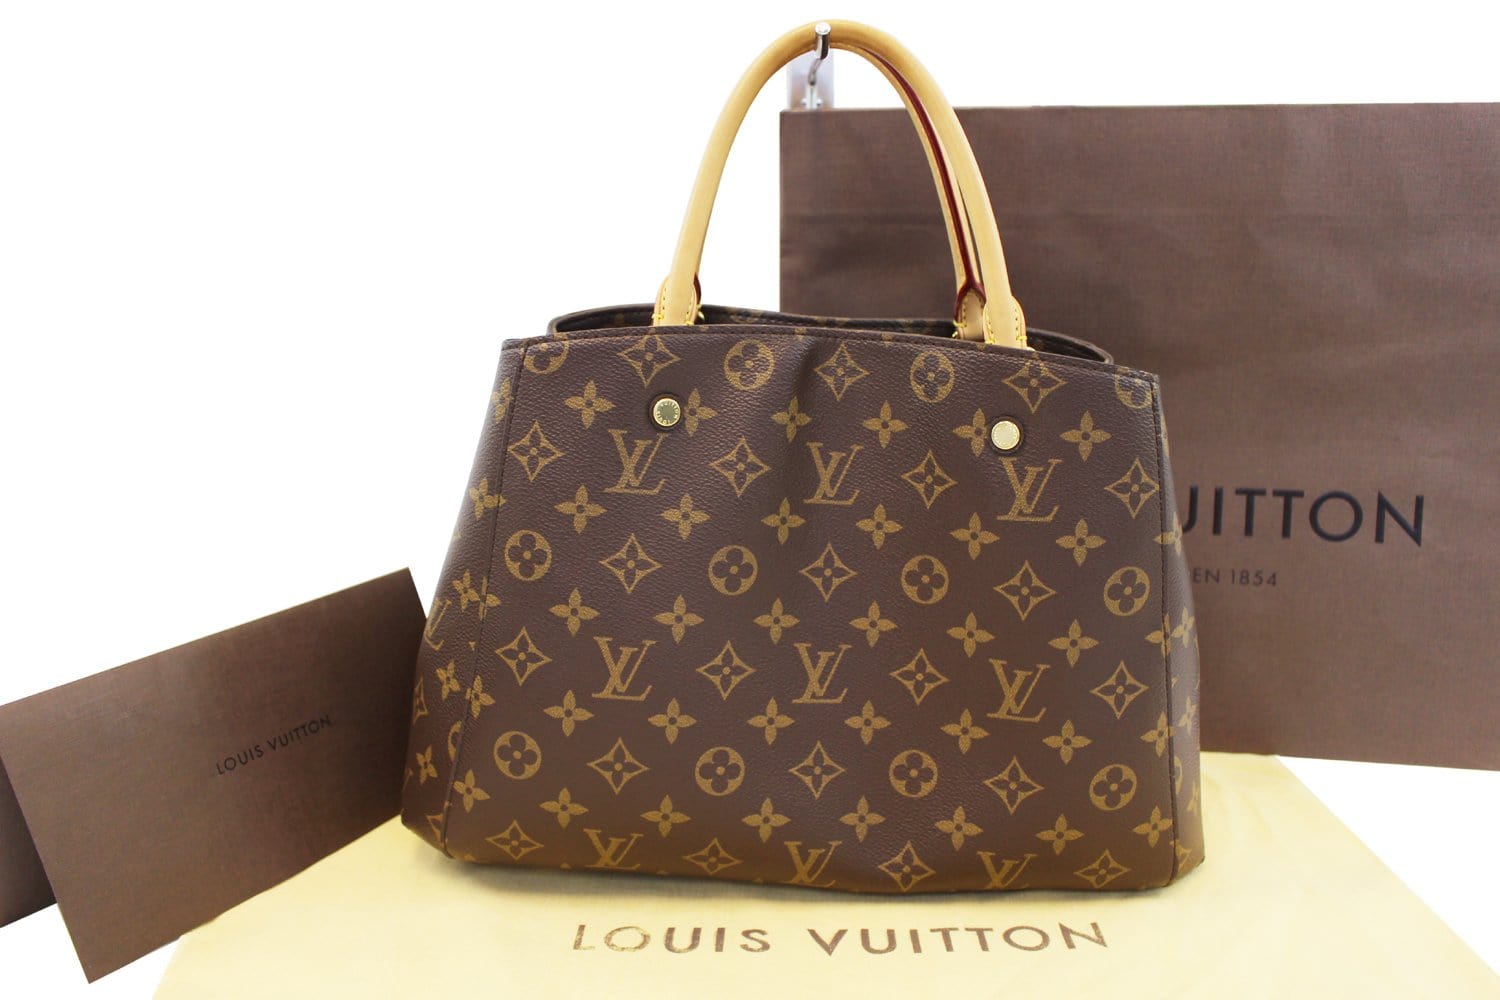 Montaigne MM bag from the Louis Vuitton Masters limite…